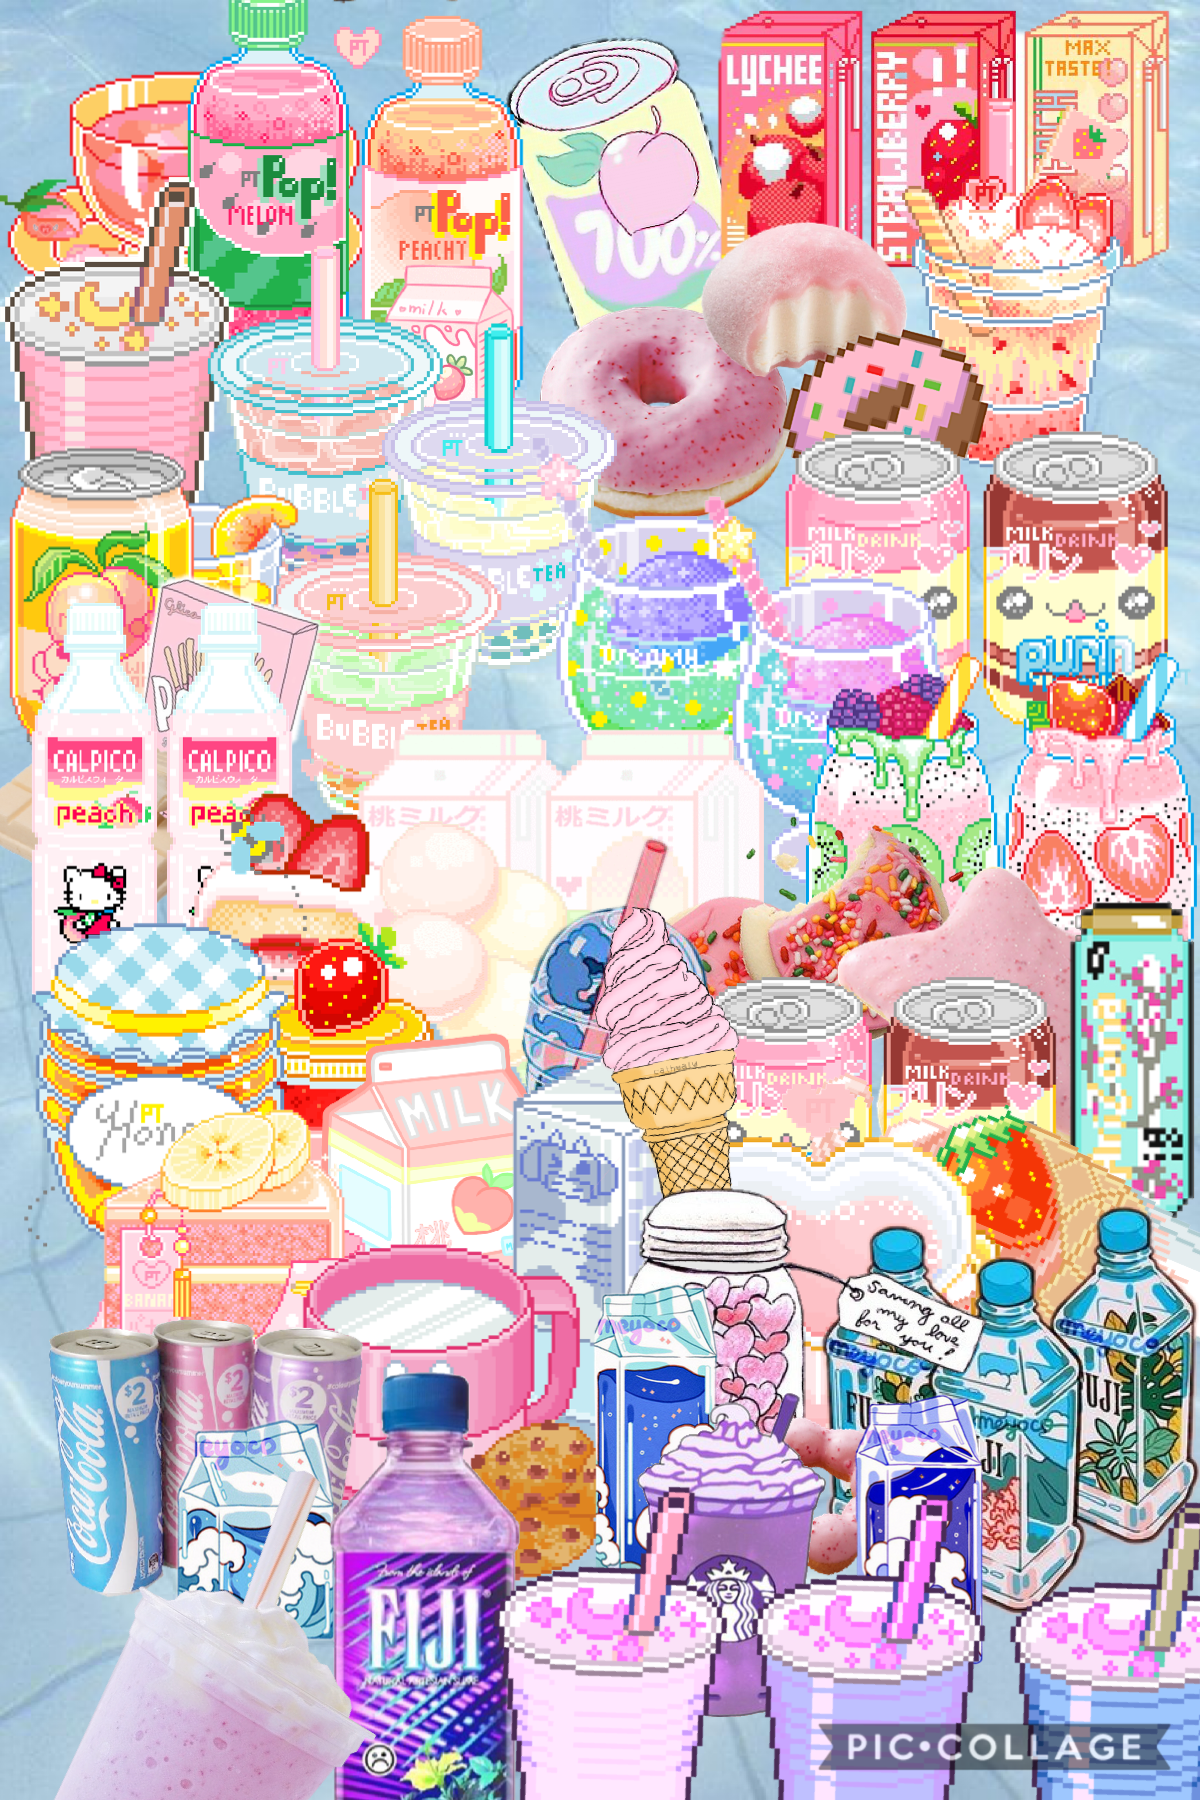 Pastel png shoppe~
Hey guys whats your favorite song right now? Mines lalala!